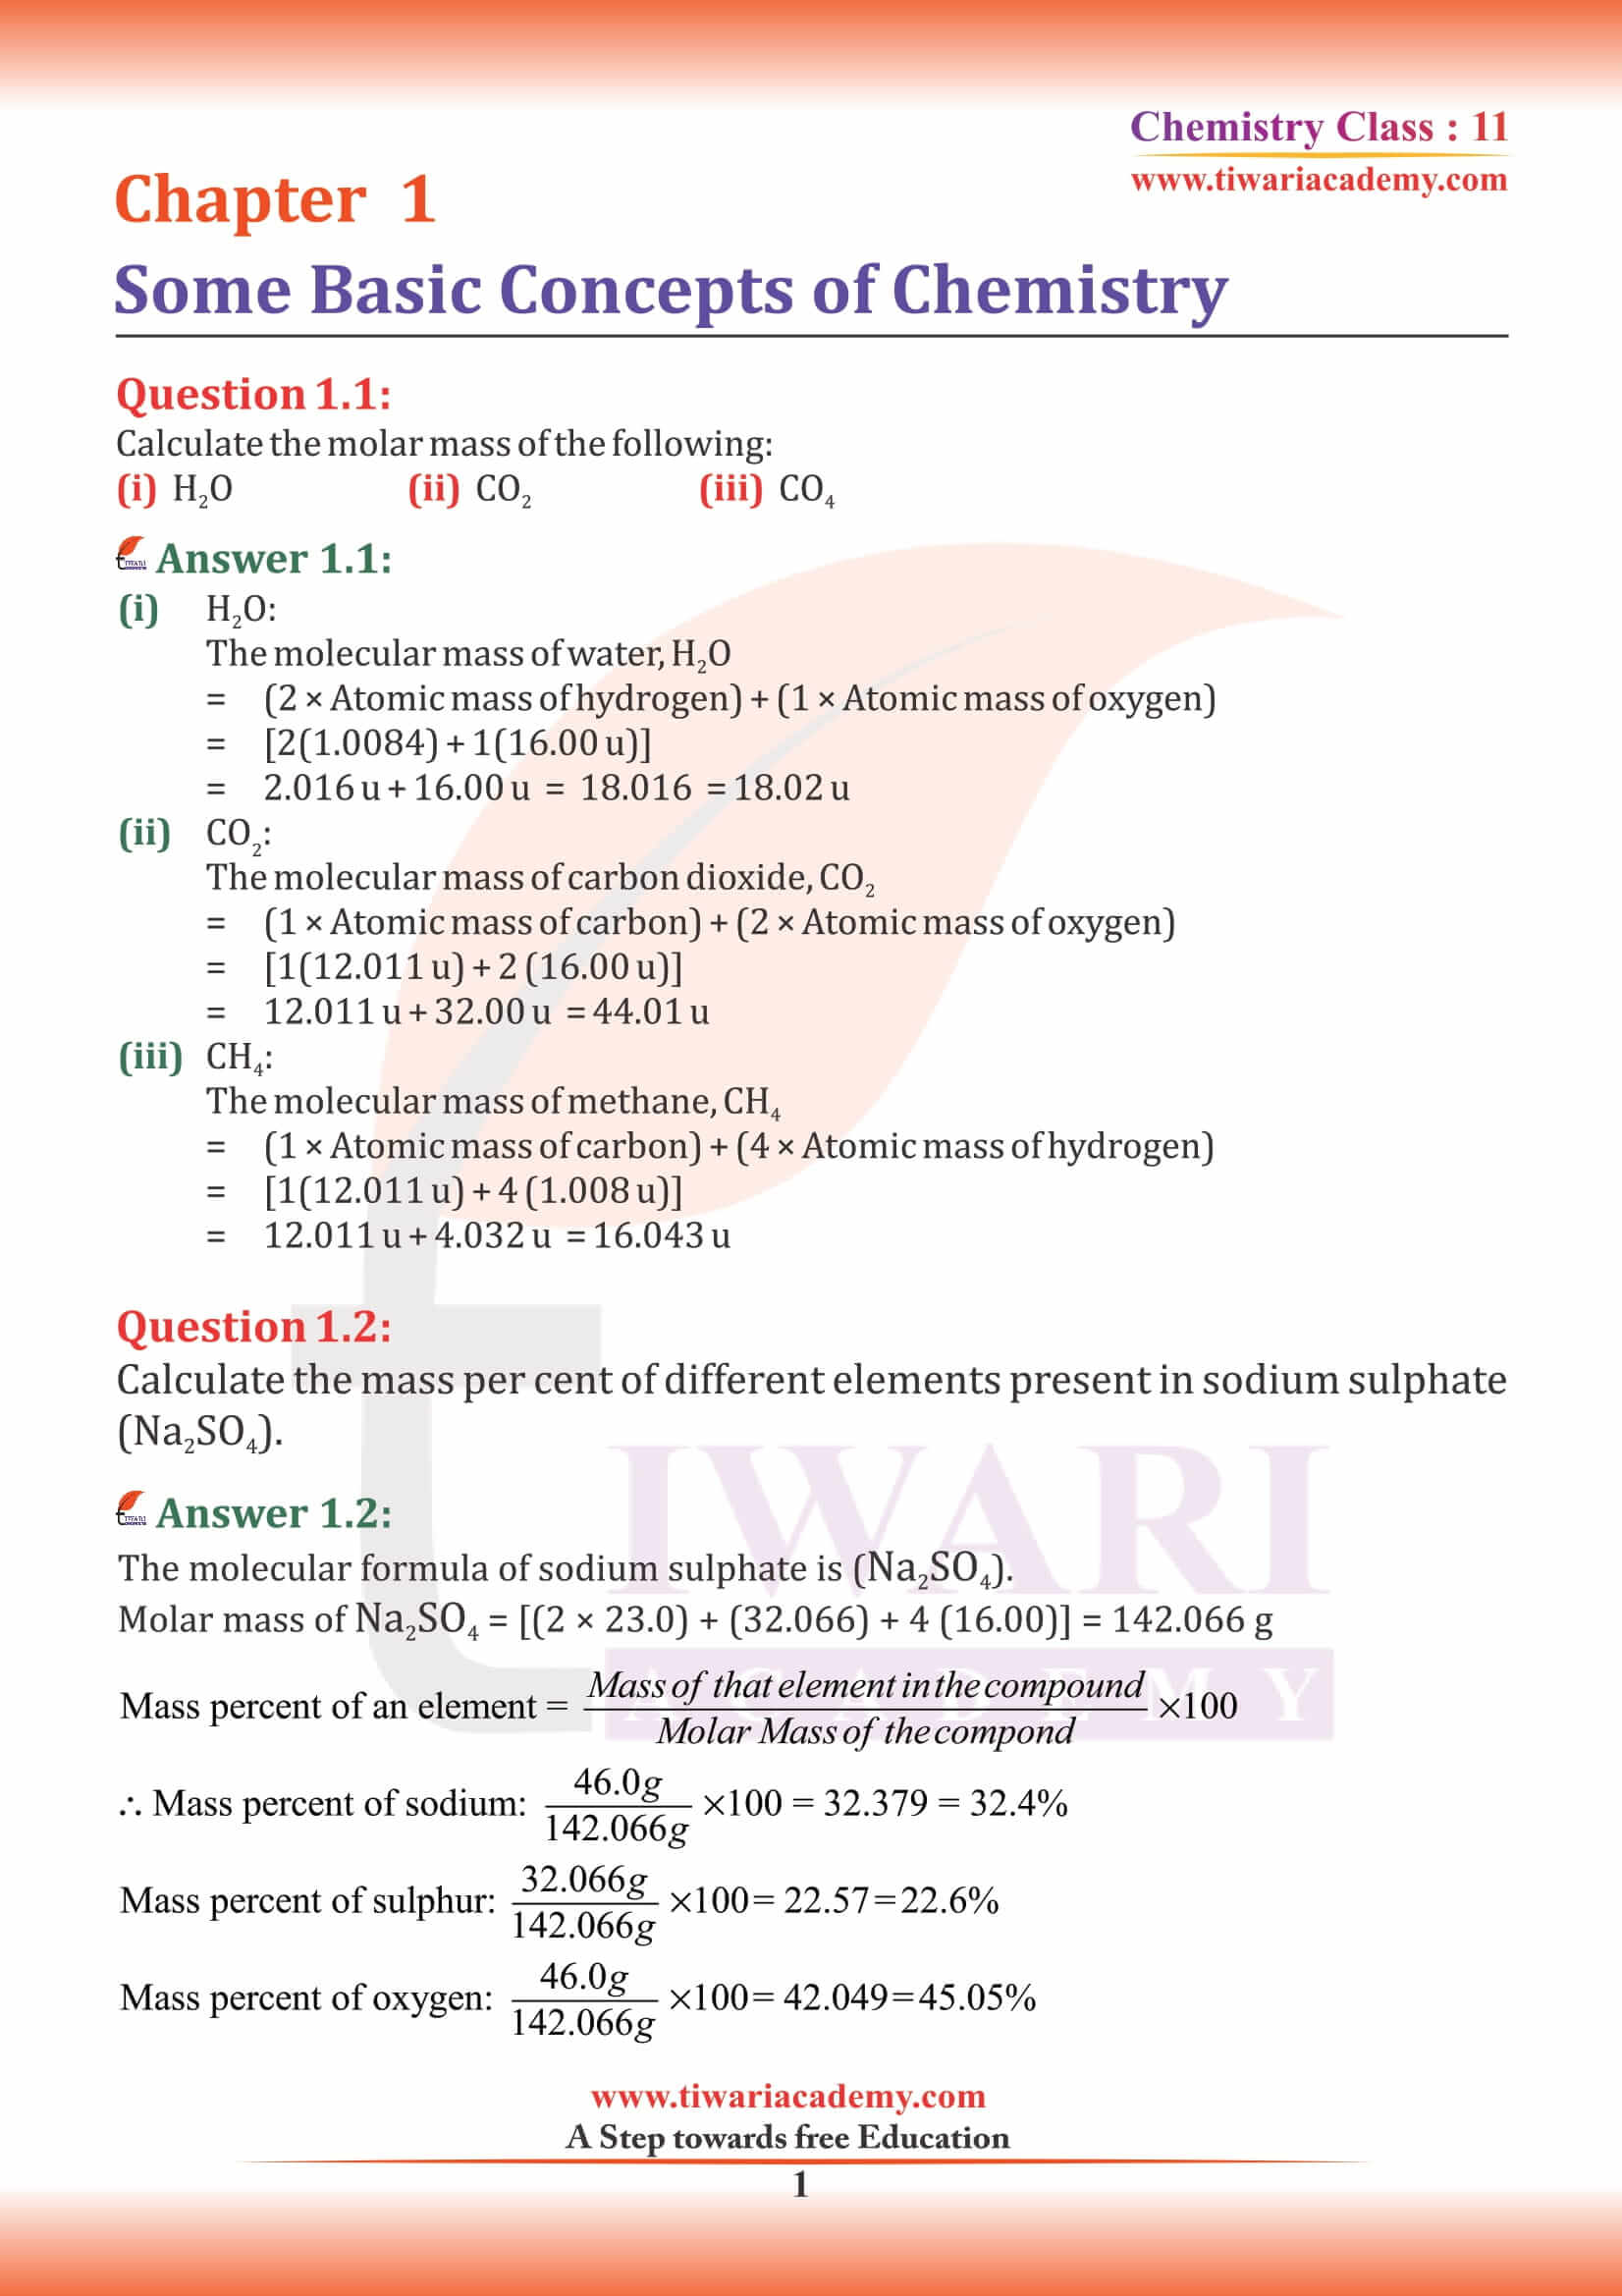 NCERT Solutions for Class 11 Chemistry Chapter 1 Question 1 and 2